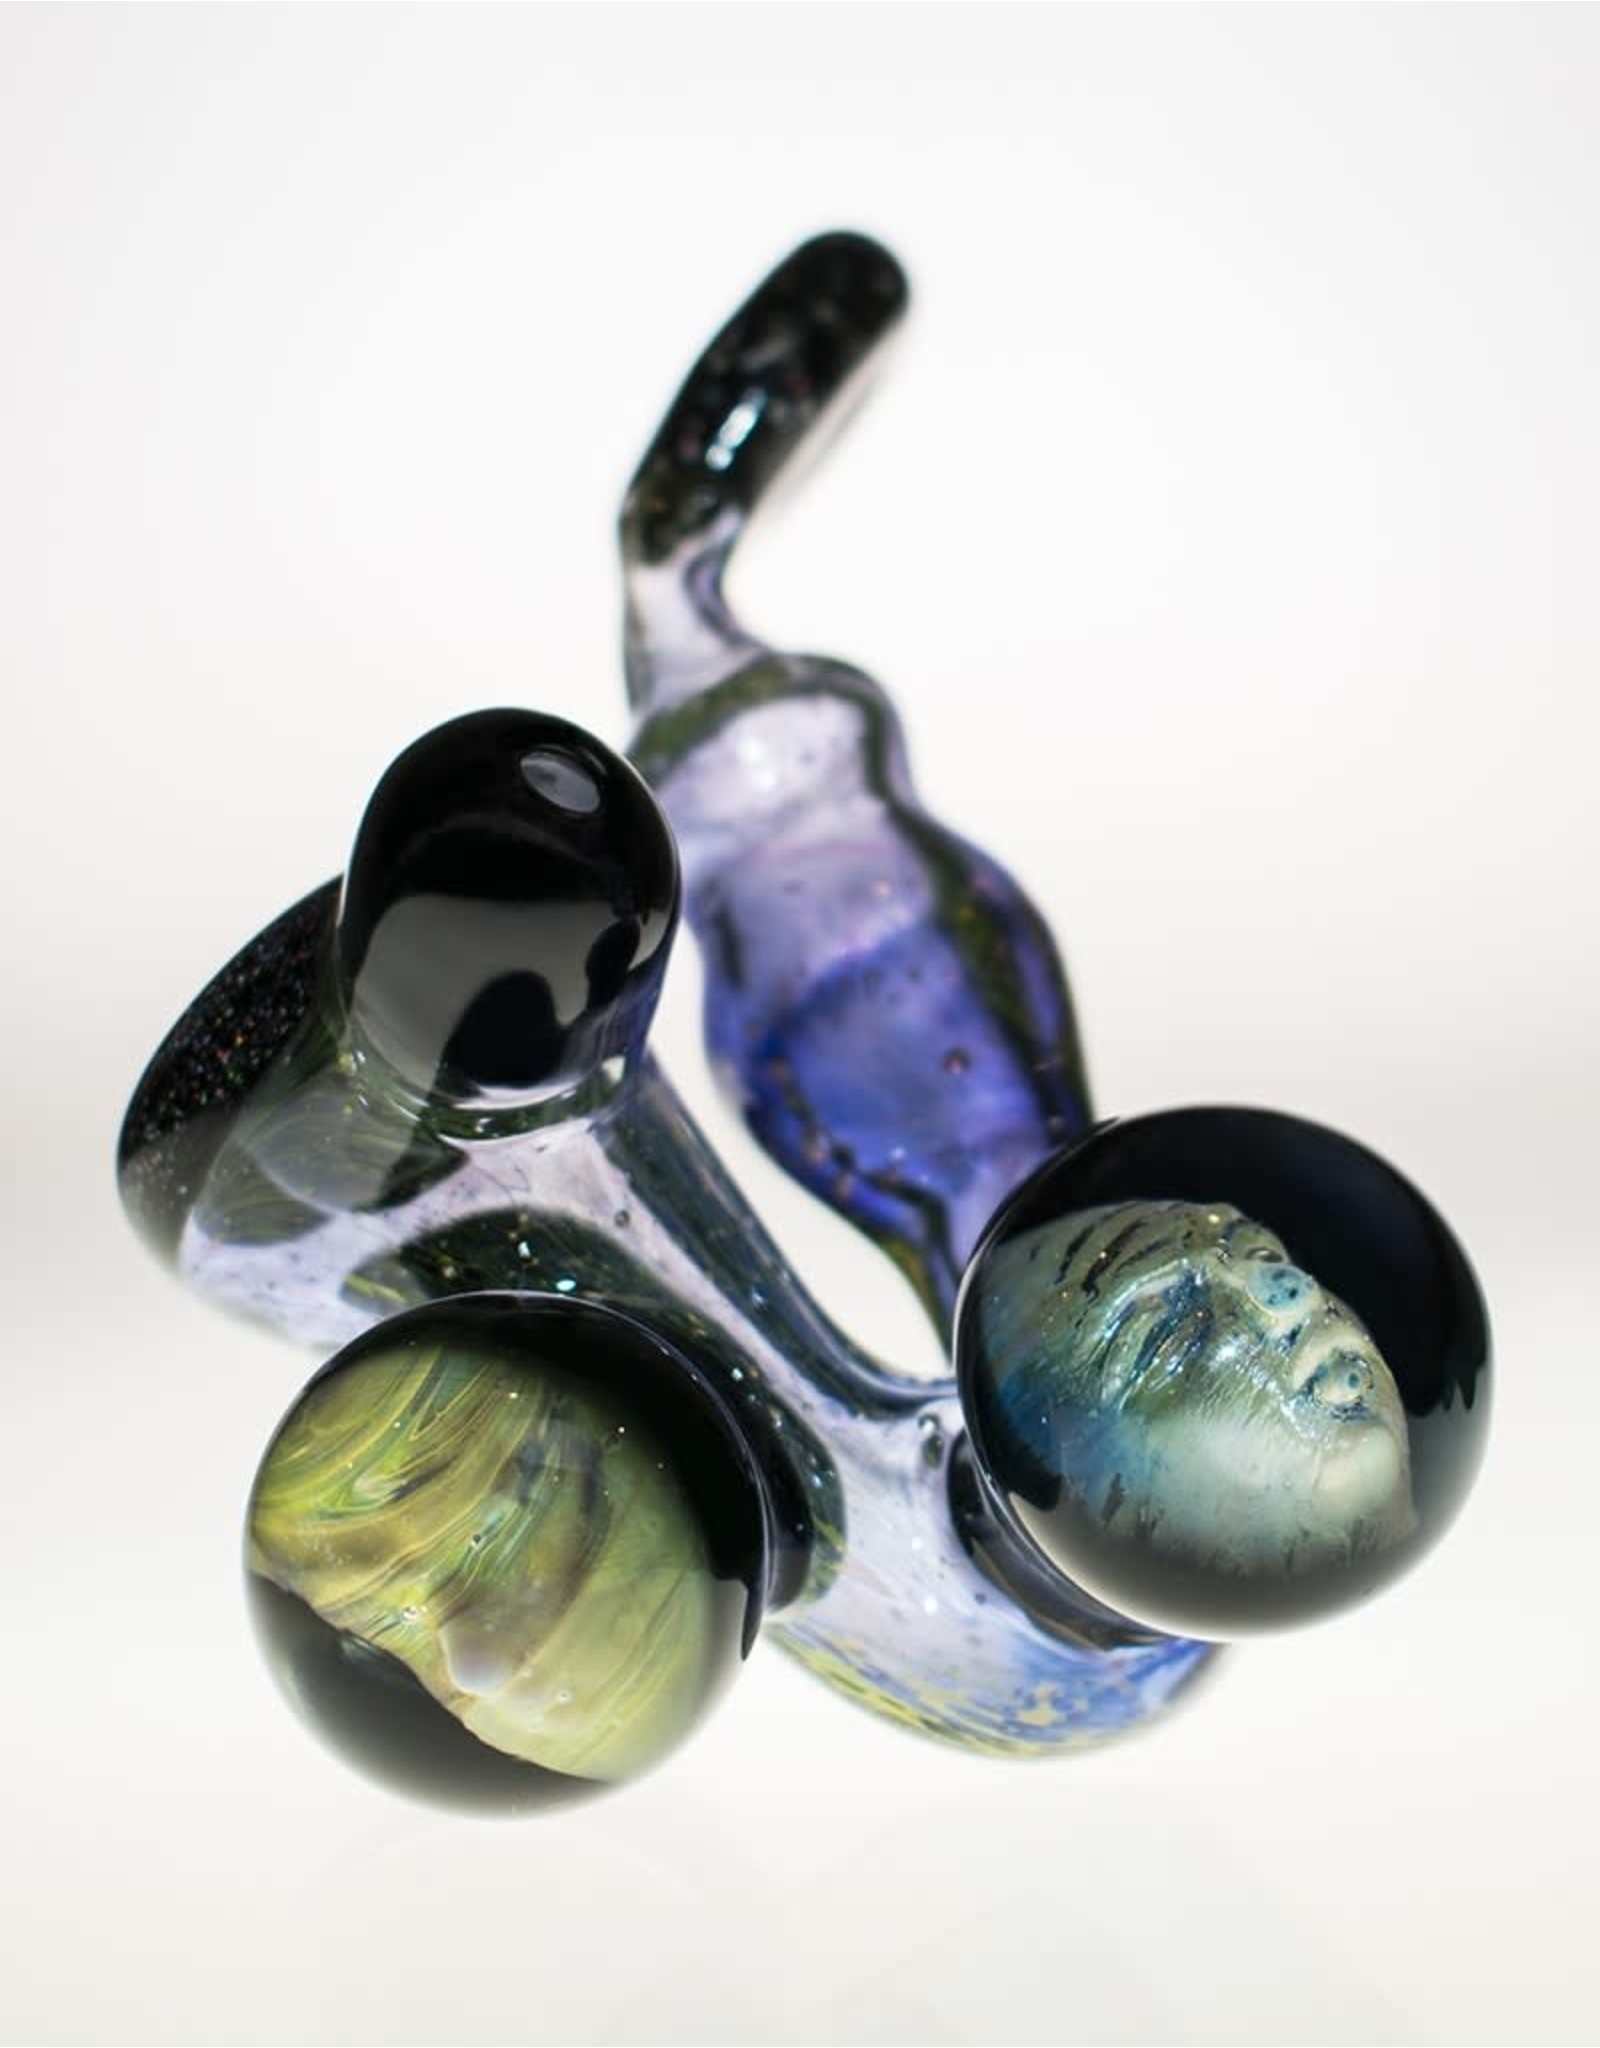 Rex Glass Sherlock with crushed opal and face marbles